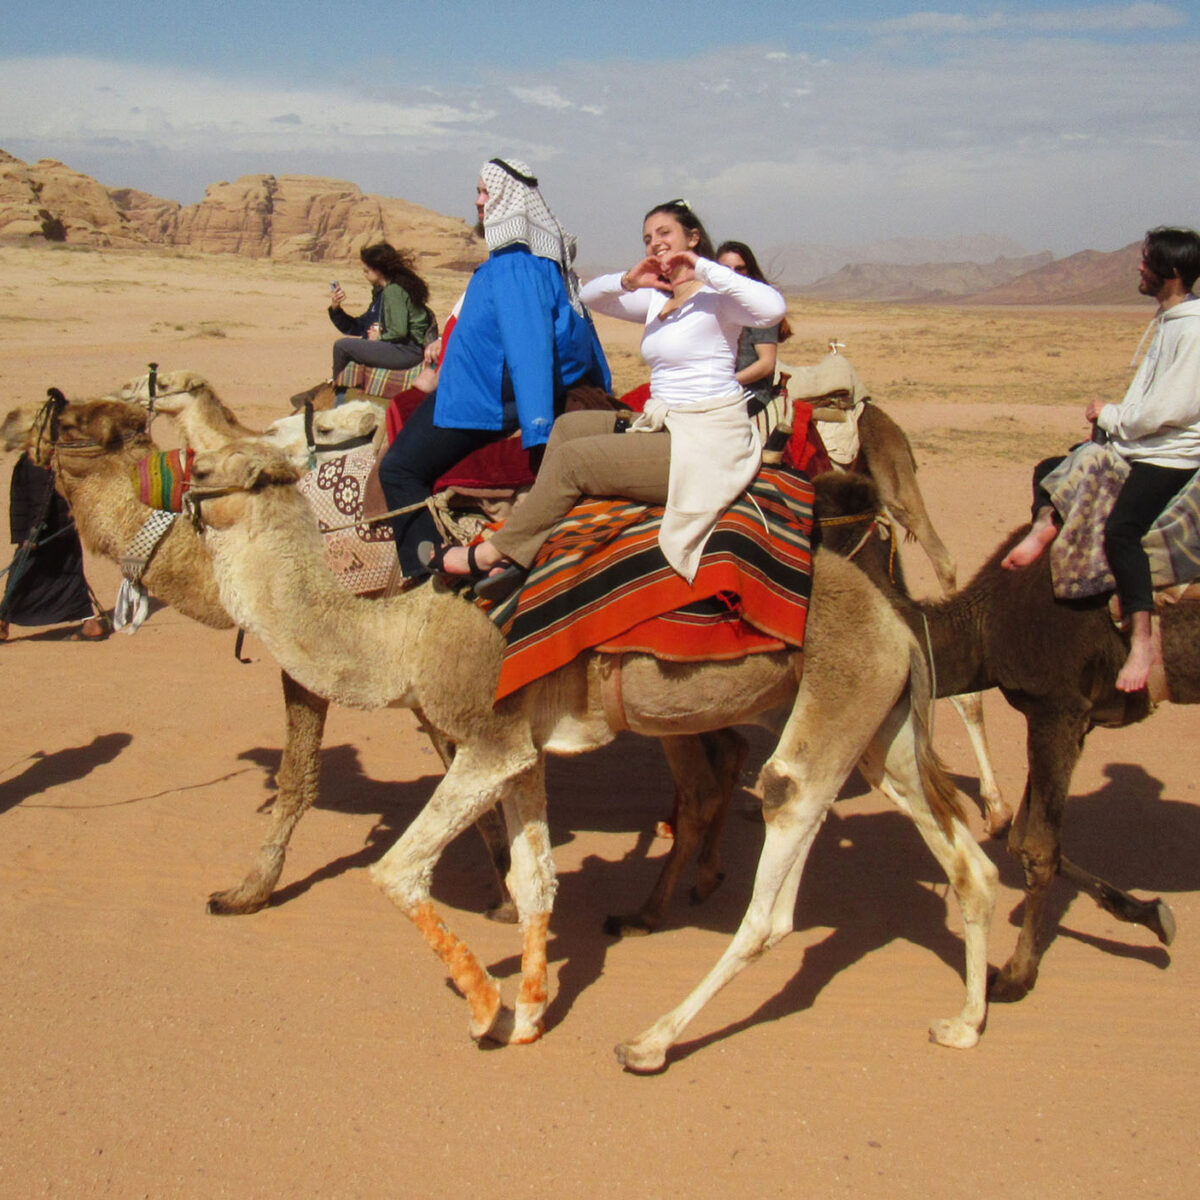 abroad students riding camels through the desert of jordan while waving at the camera